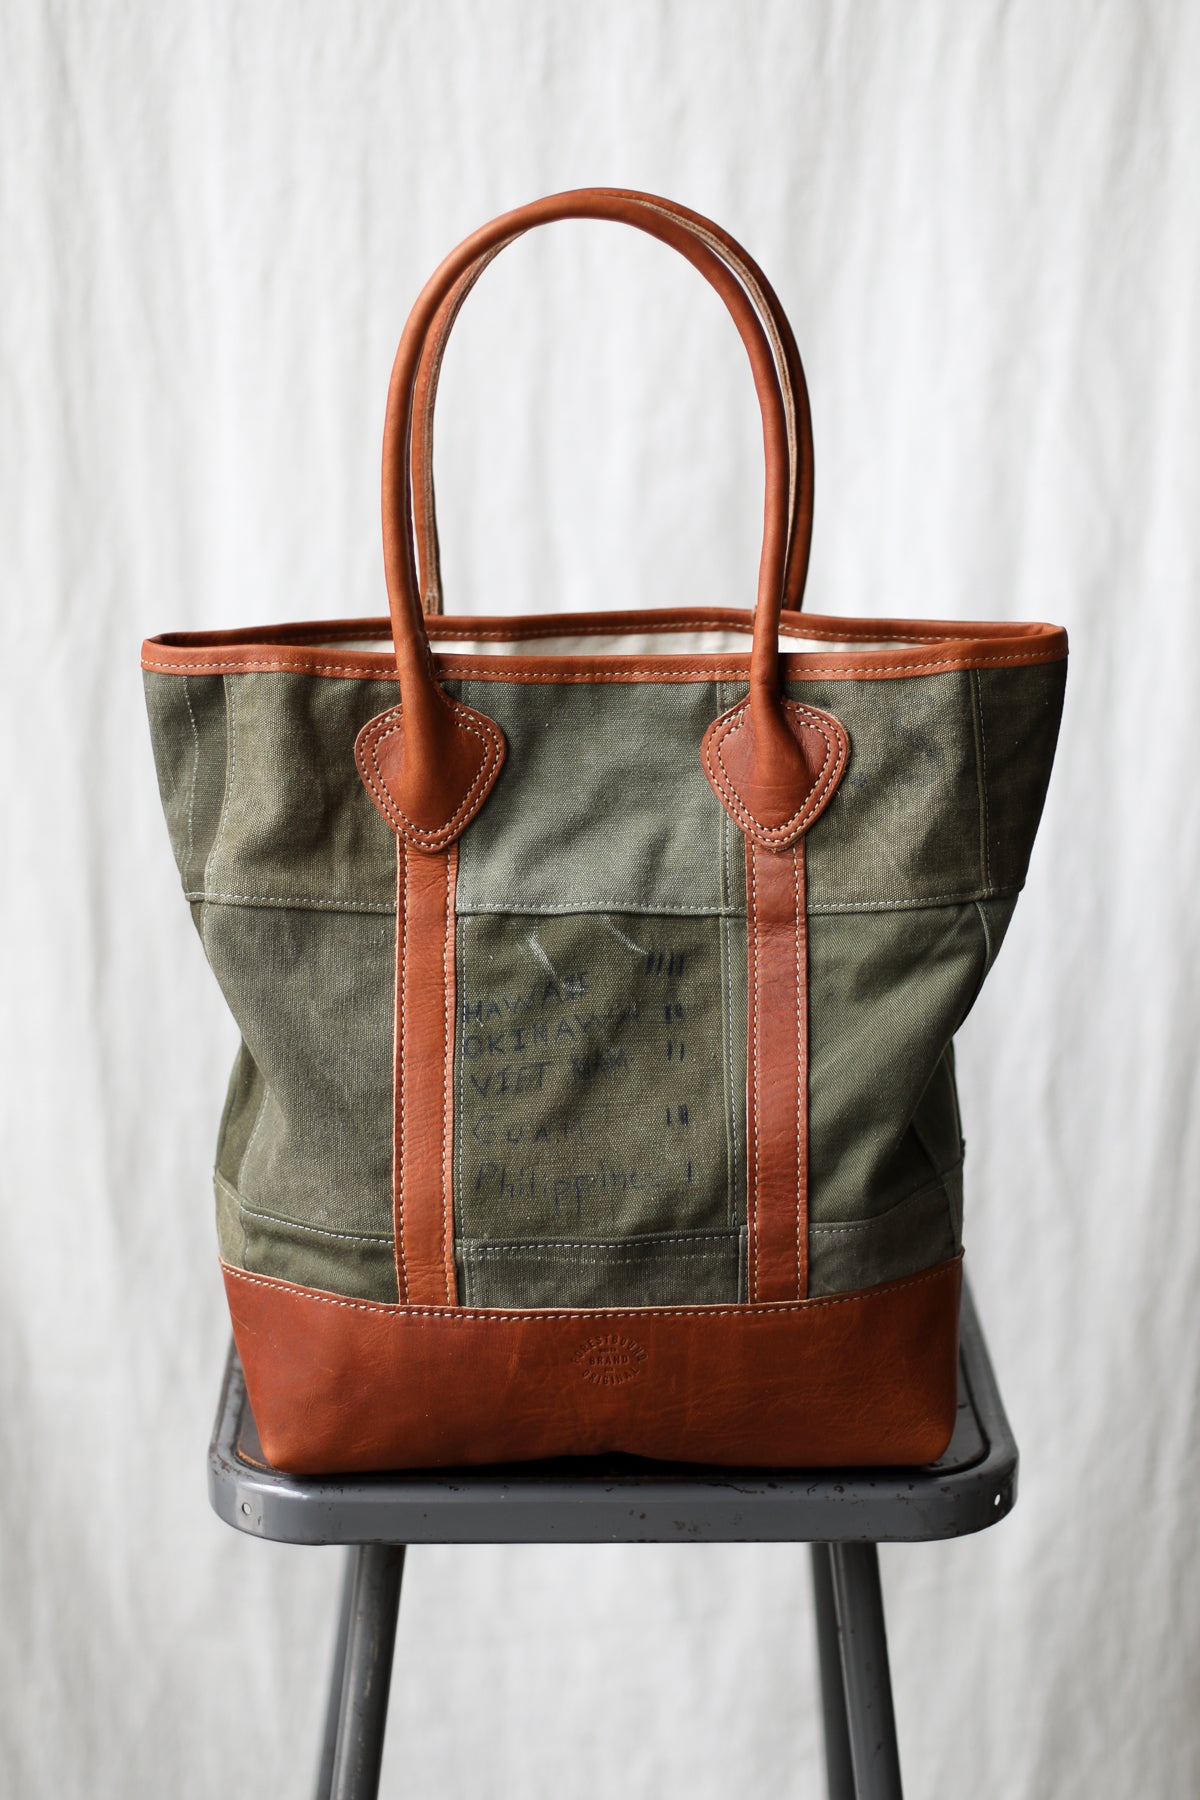 1940's era Salvaged Canvas Patchwork Tote Bag